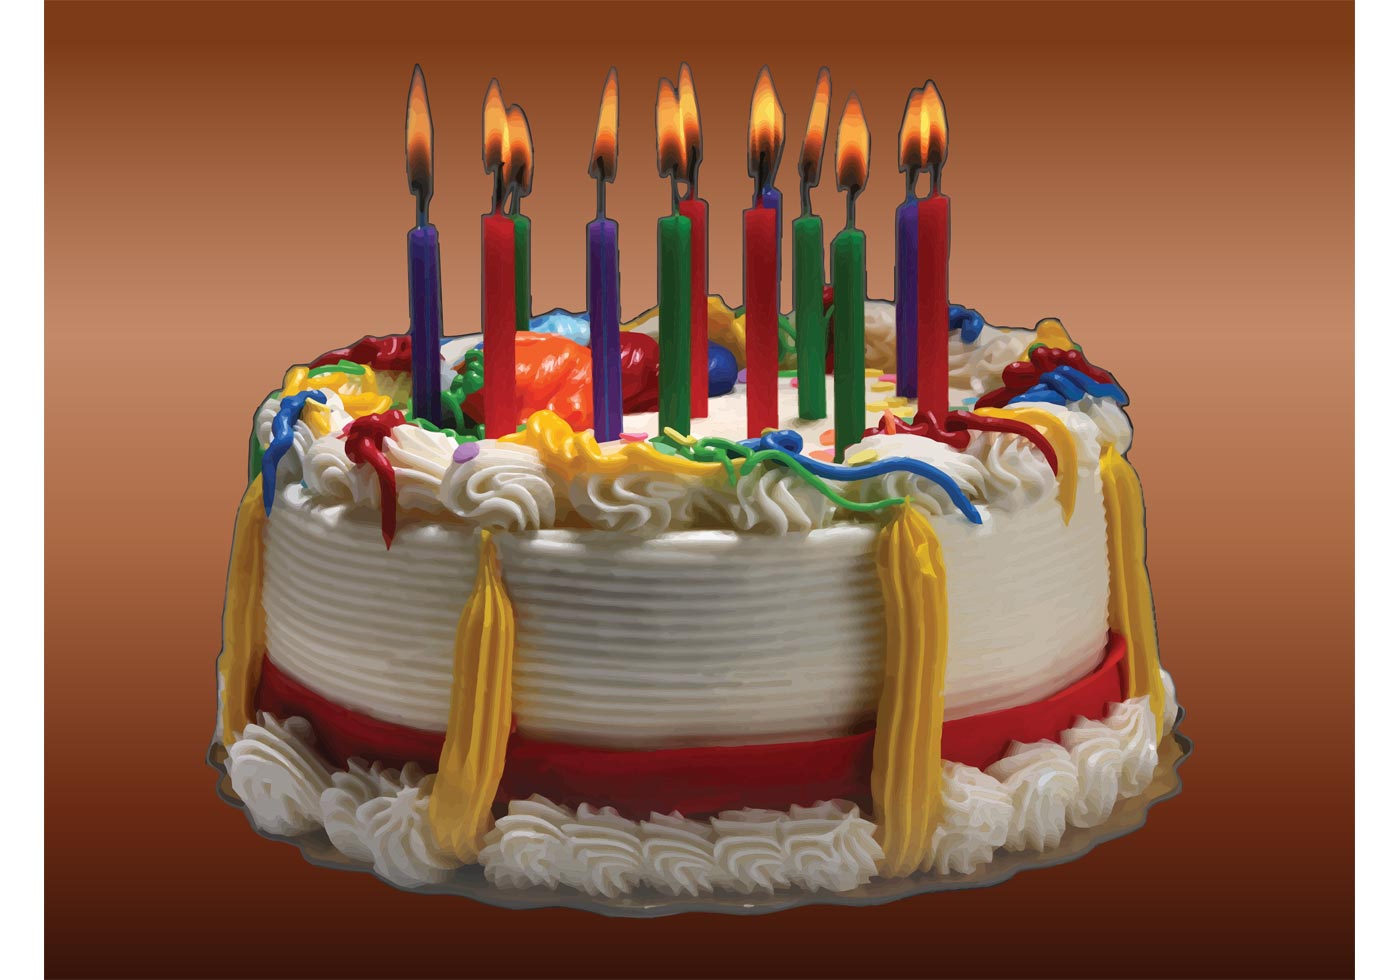 Birthday Cake Image - Download Free Vector Art, Stock Graphics & Images